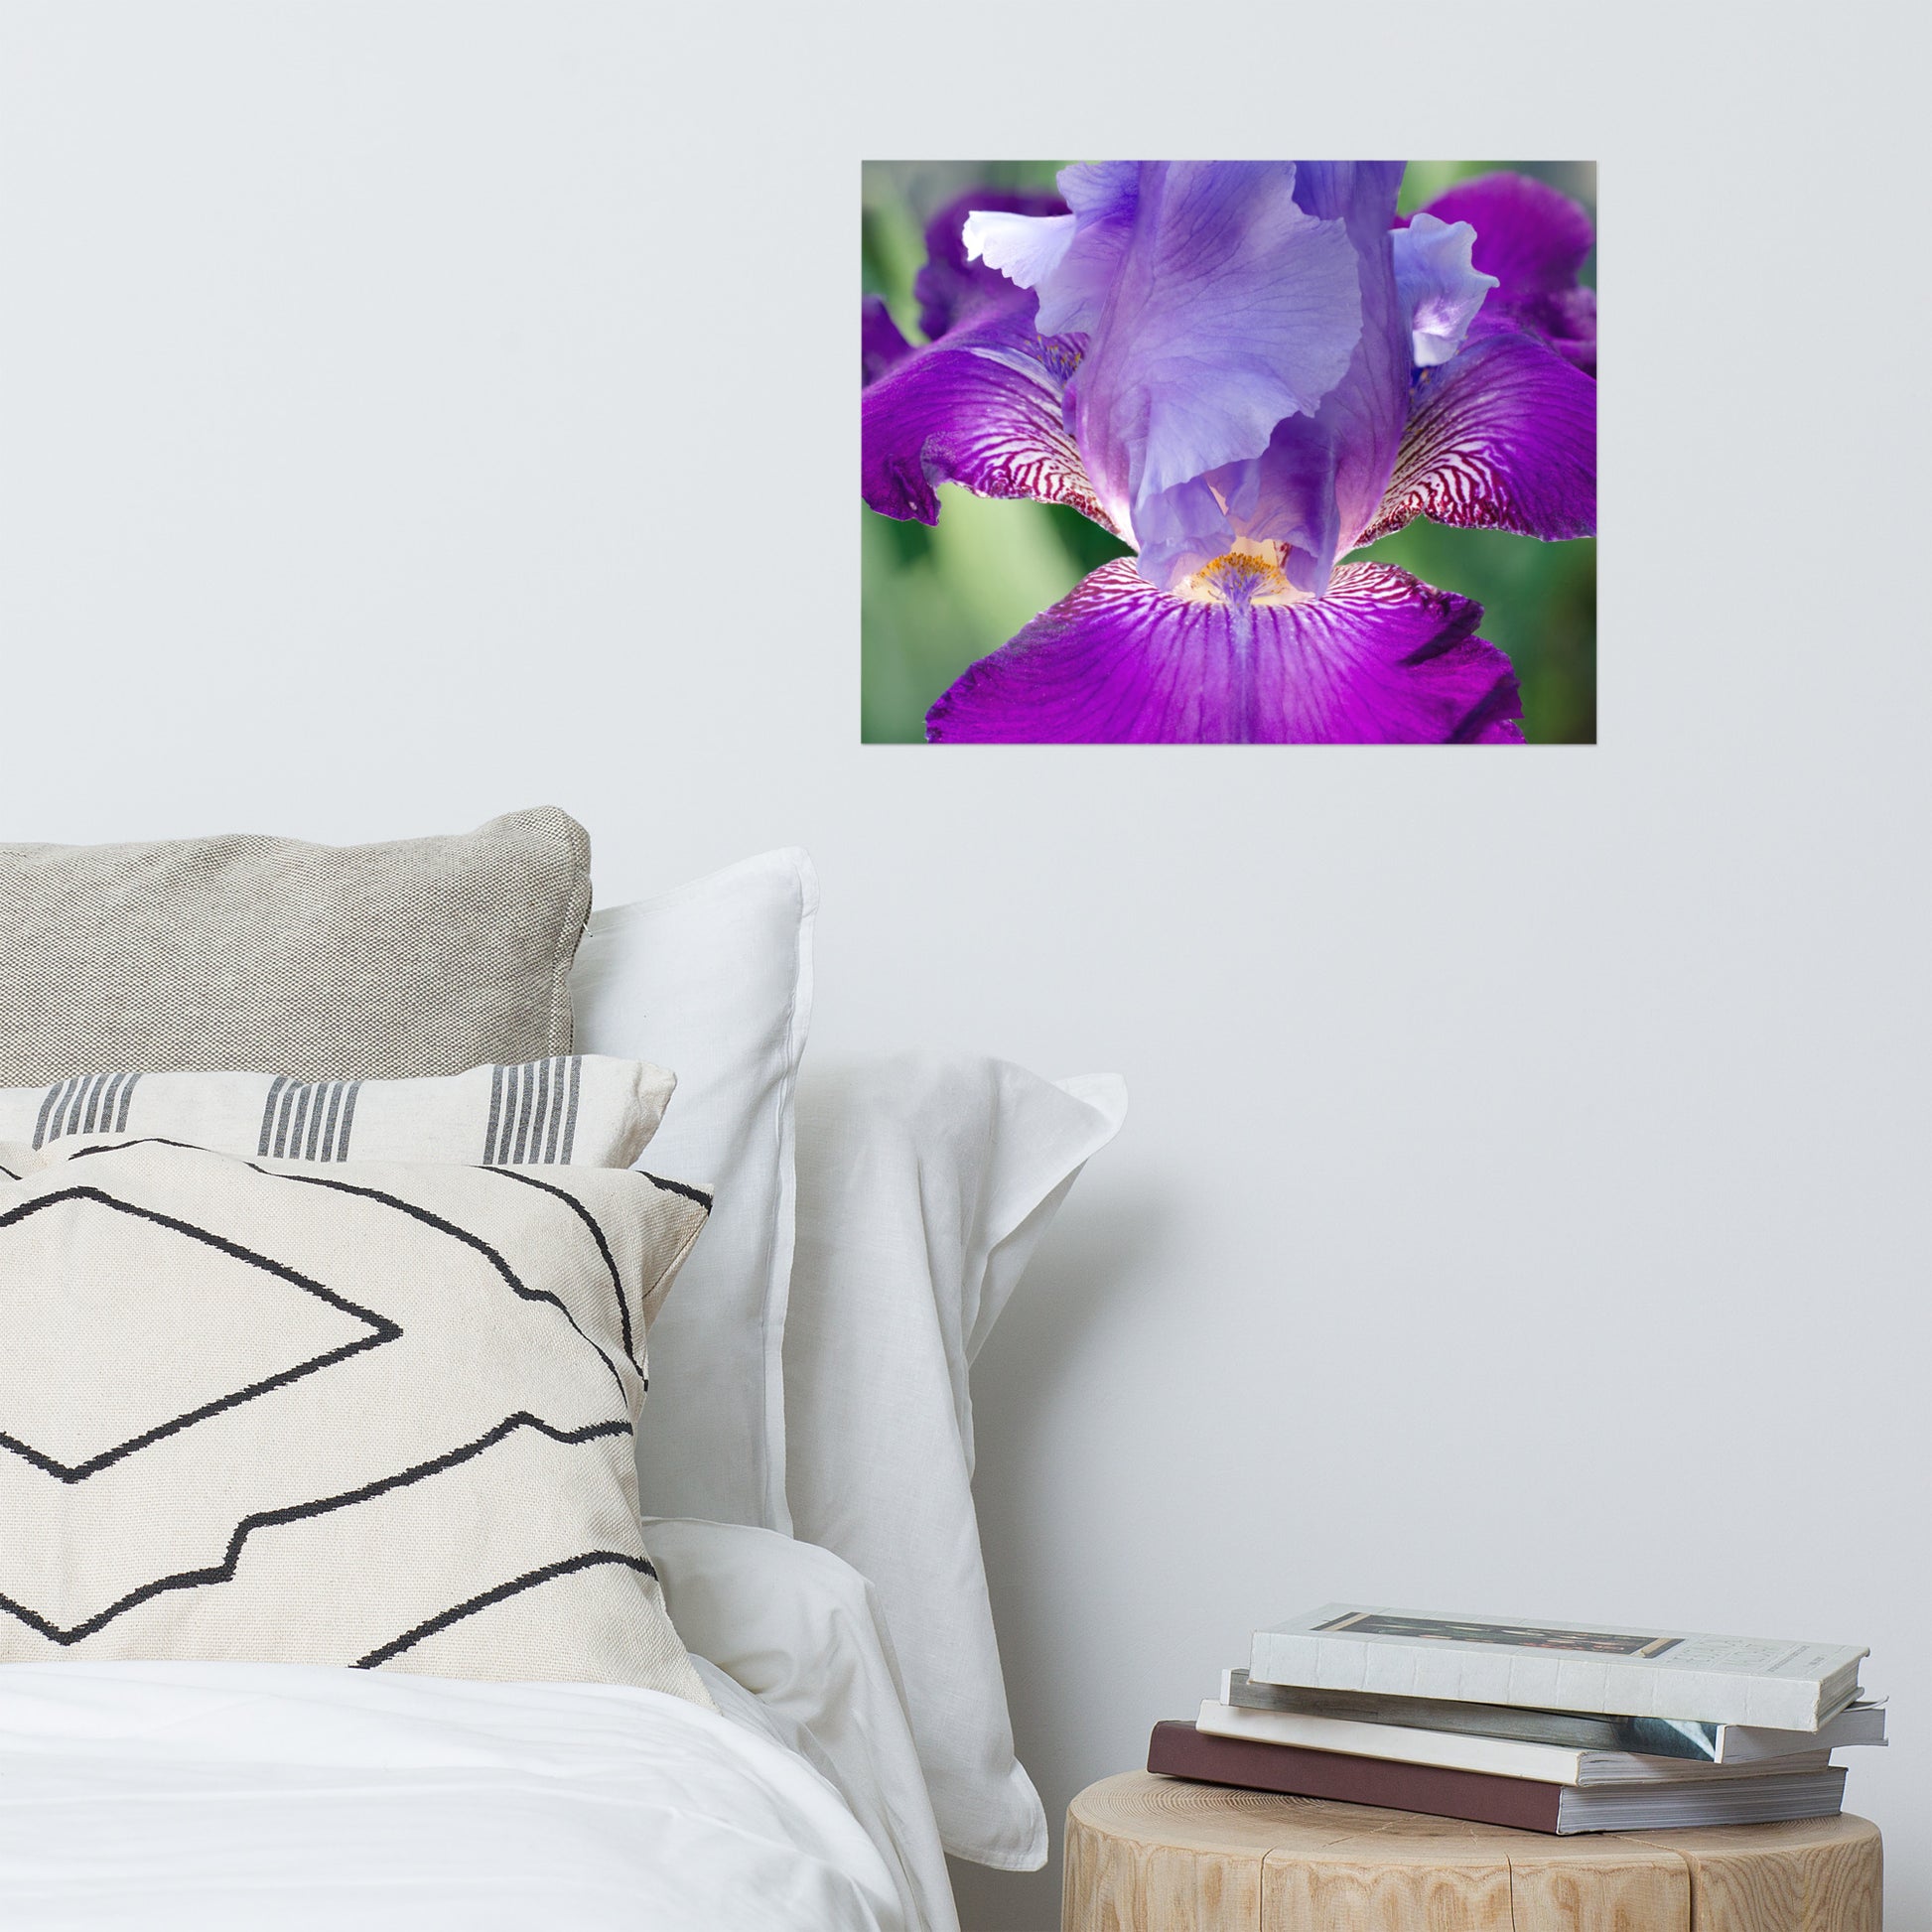 Large Posters For Bedroom: Glowing Iris - Botanical / Floral / Flora / Flowers / Nature Photograph - Loose / Frameable / Unframed / Frameless Wall Art Print - Artwork